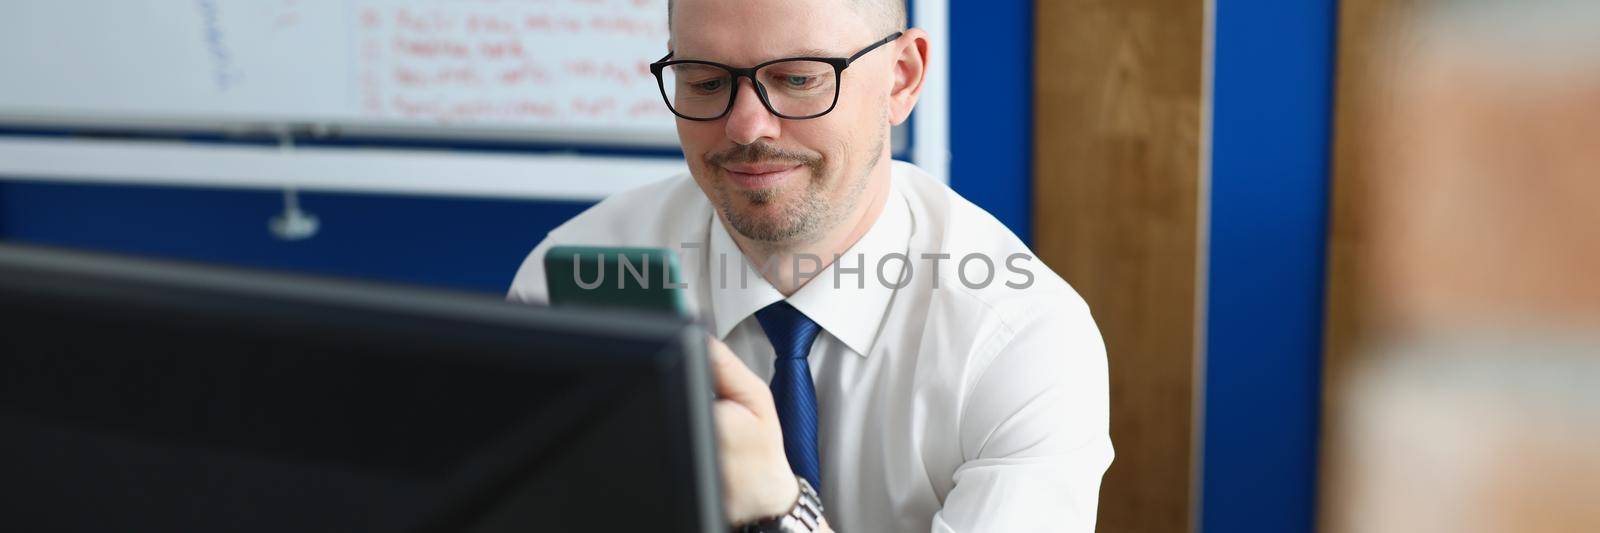 Portrait of company boss texting in smartphone, leader in private office. Computer on workplace, board with lettering on wall. Business, working day, career growth, technology concept